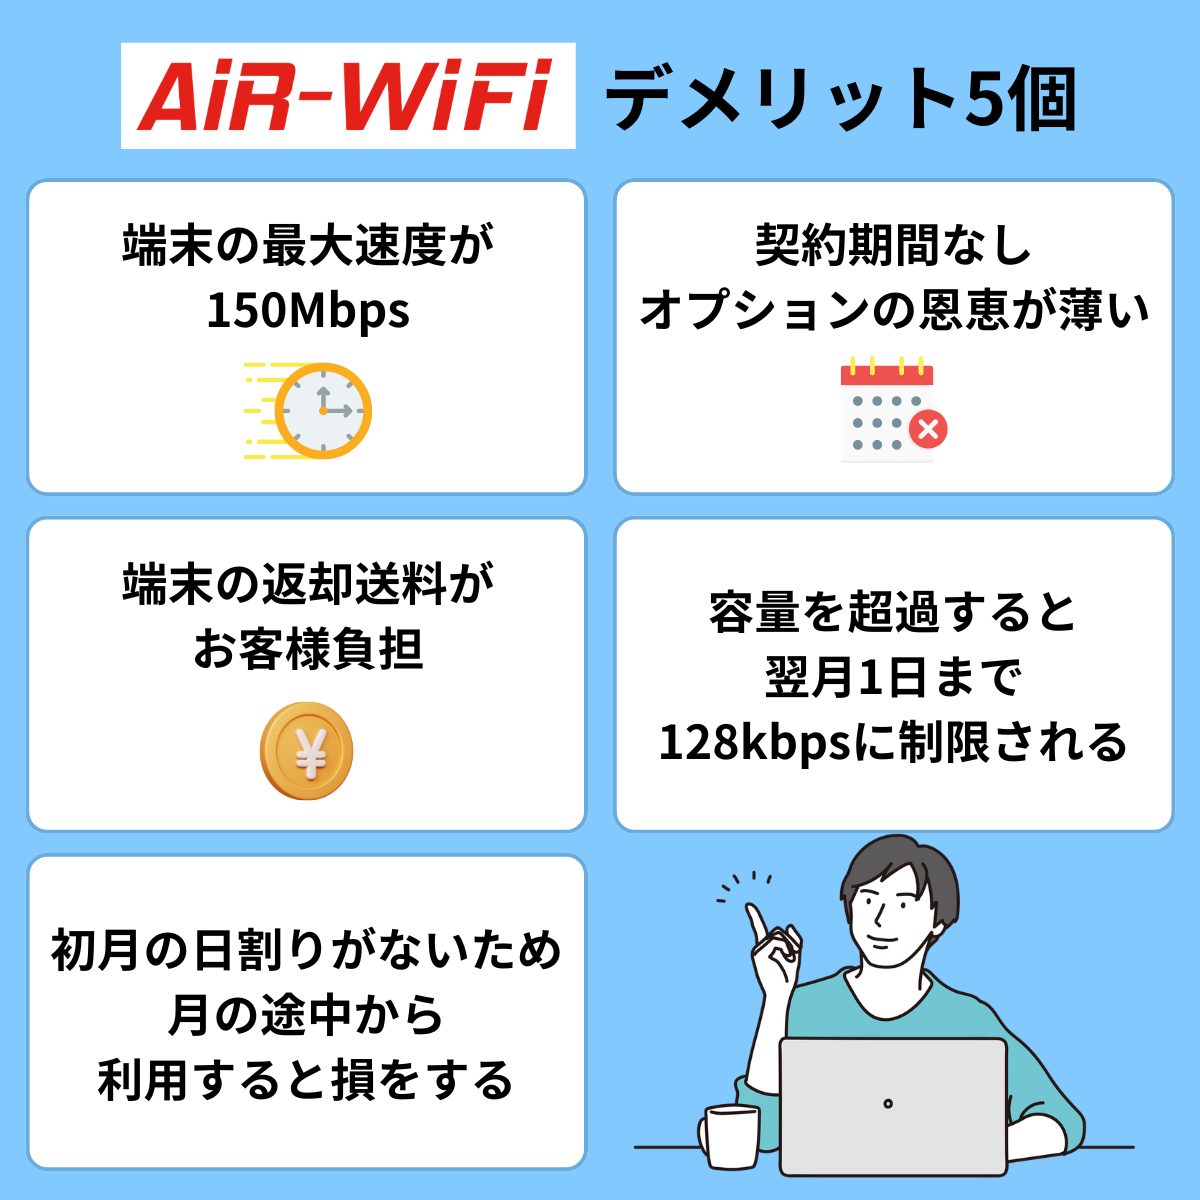 Air-WiFiのデメリット